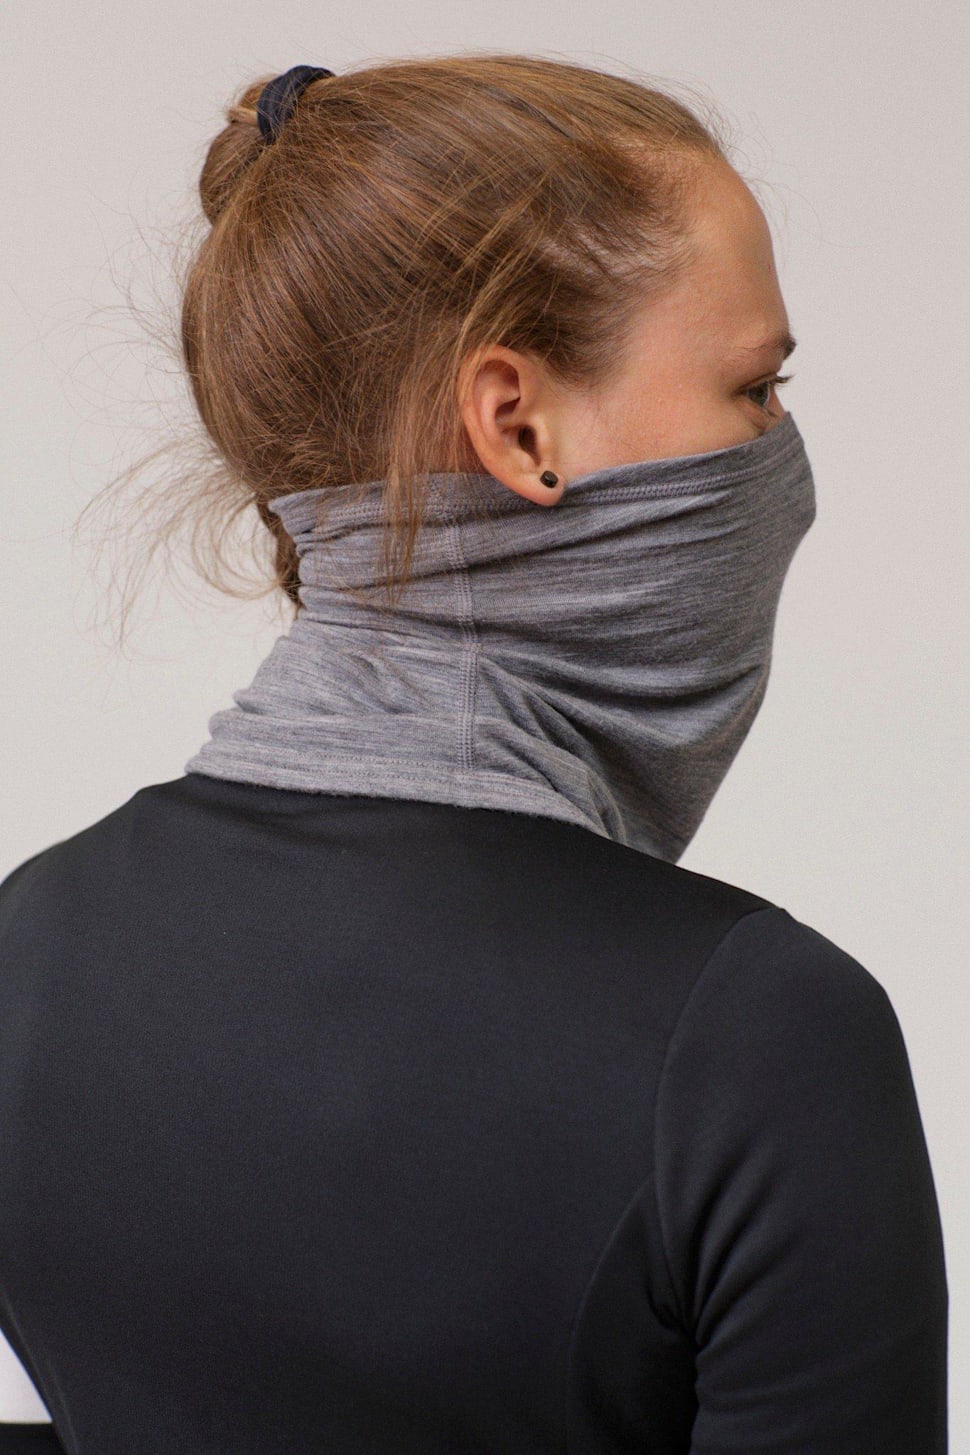 Winter Collar, Winter Collar for Cycling in Cold Conditions